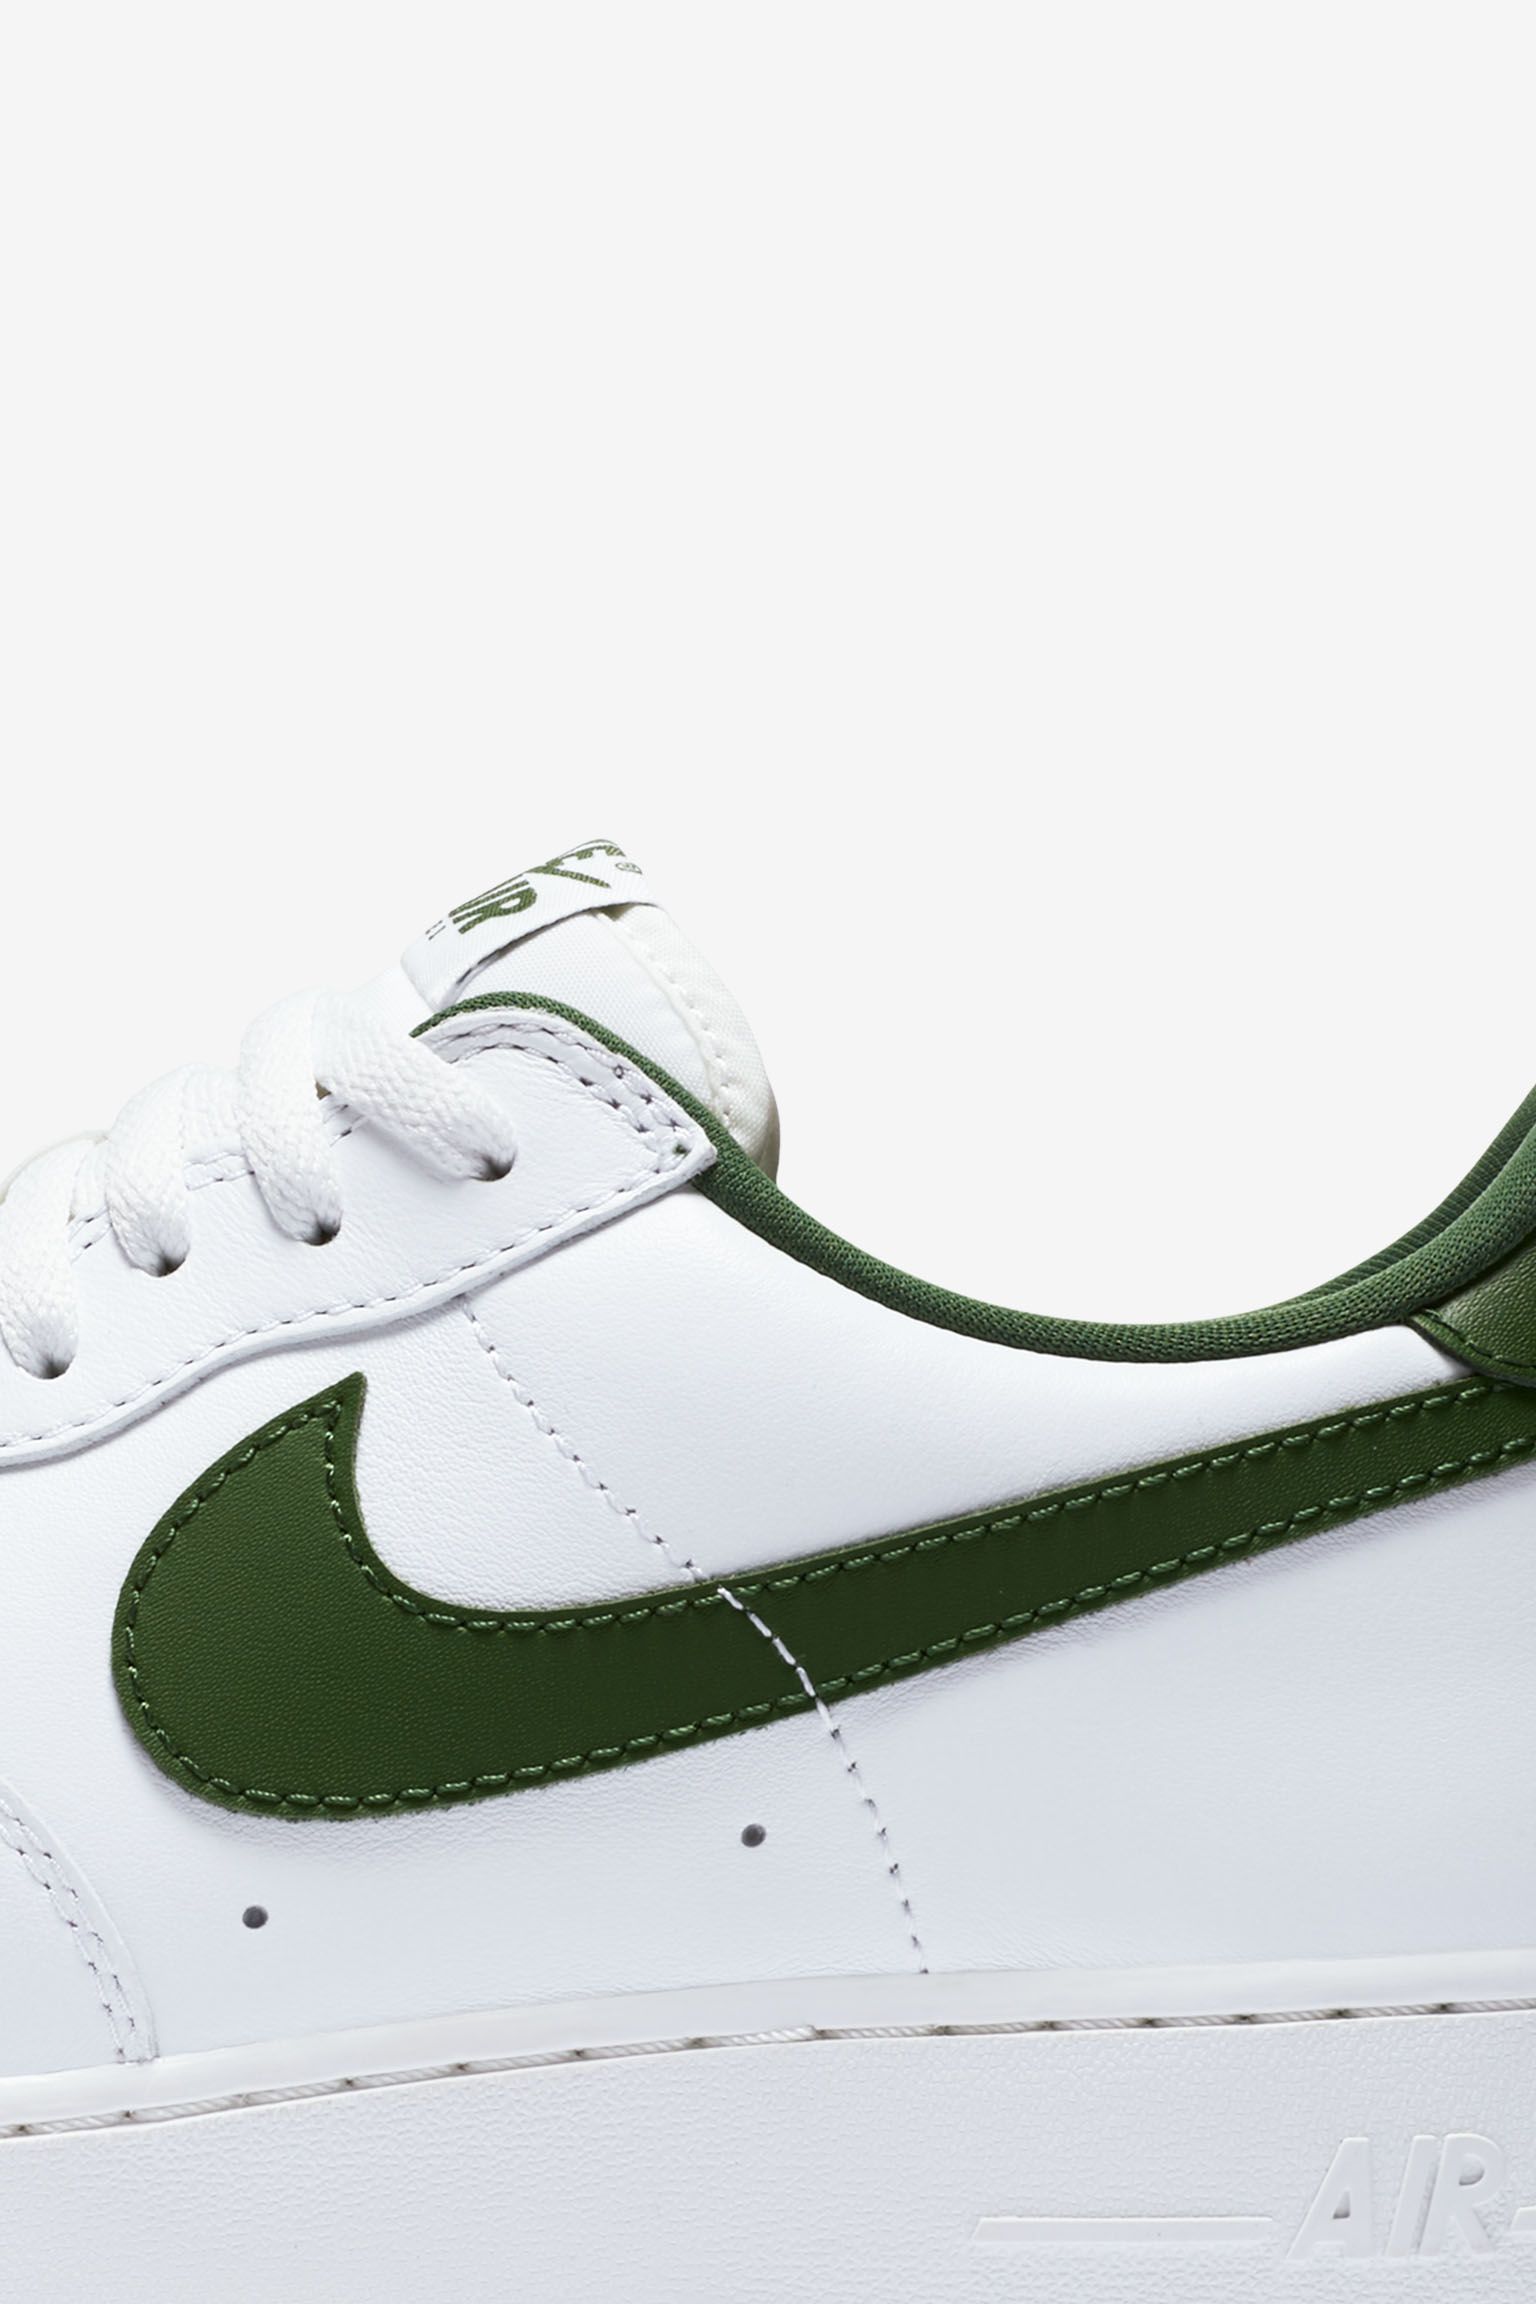 green and white high top air force ones